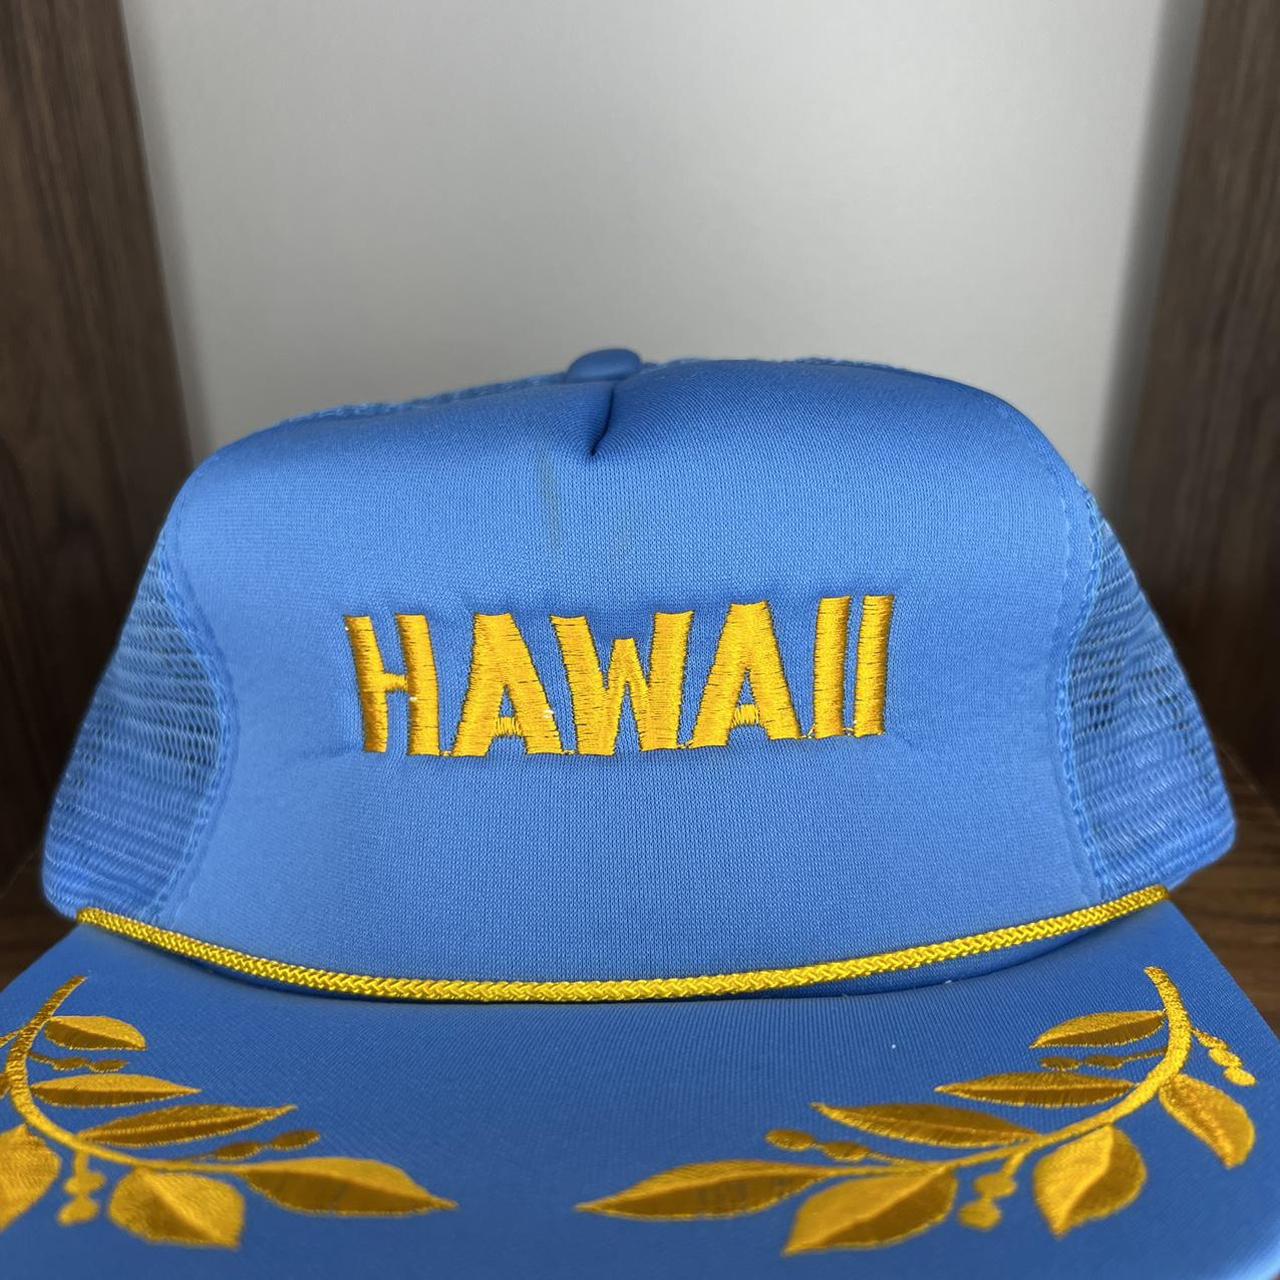 American Vintage Men's Blue and Yellow Hat (2)